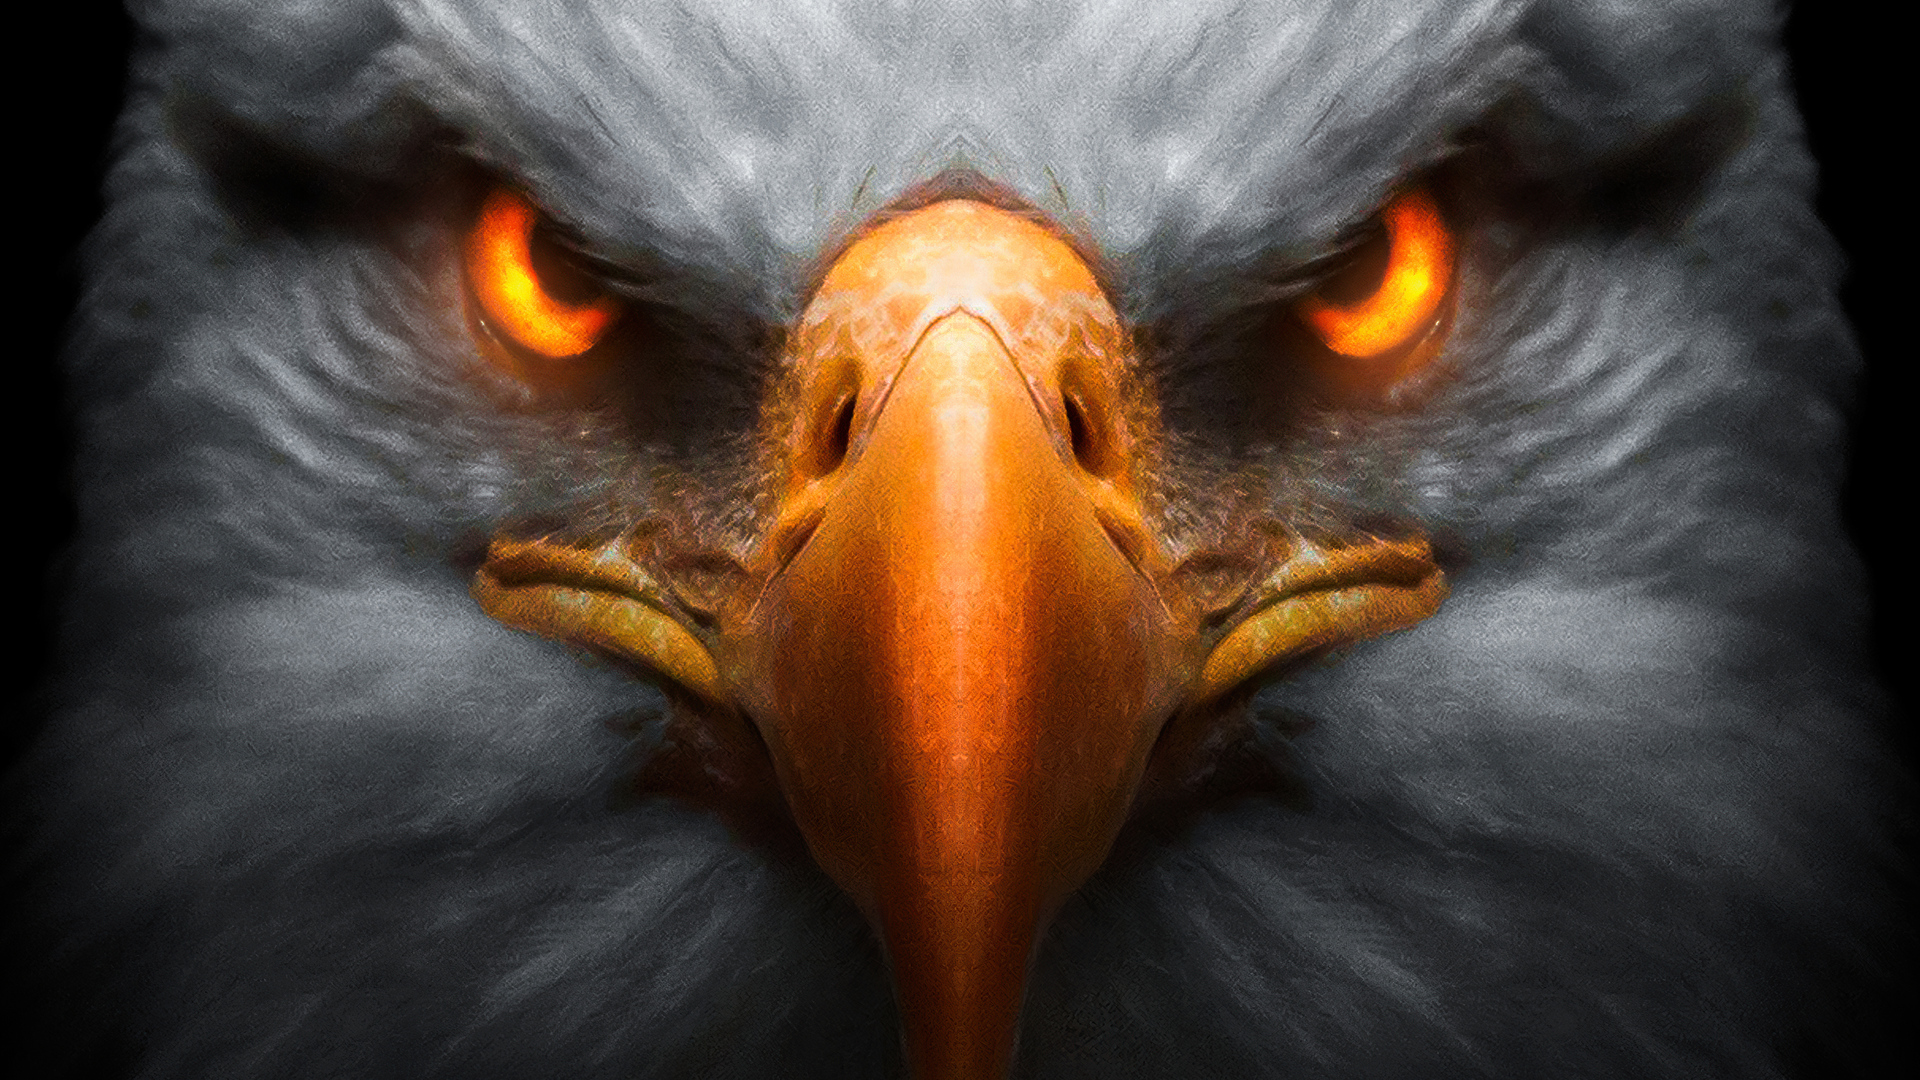 Cool Eagle Hd Wallpapers